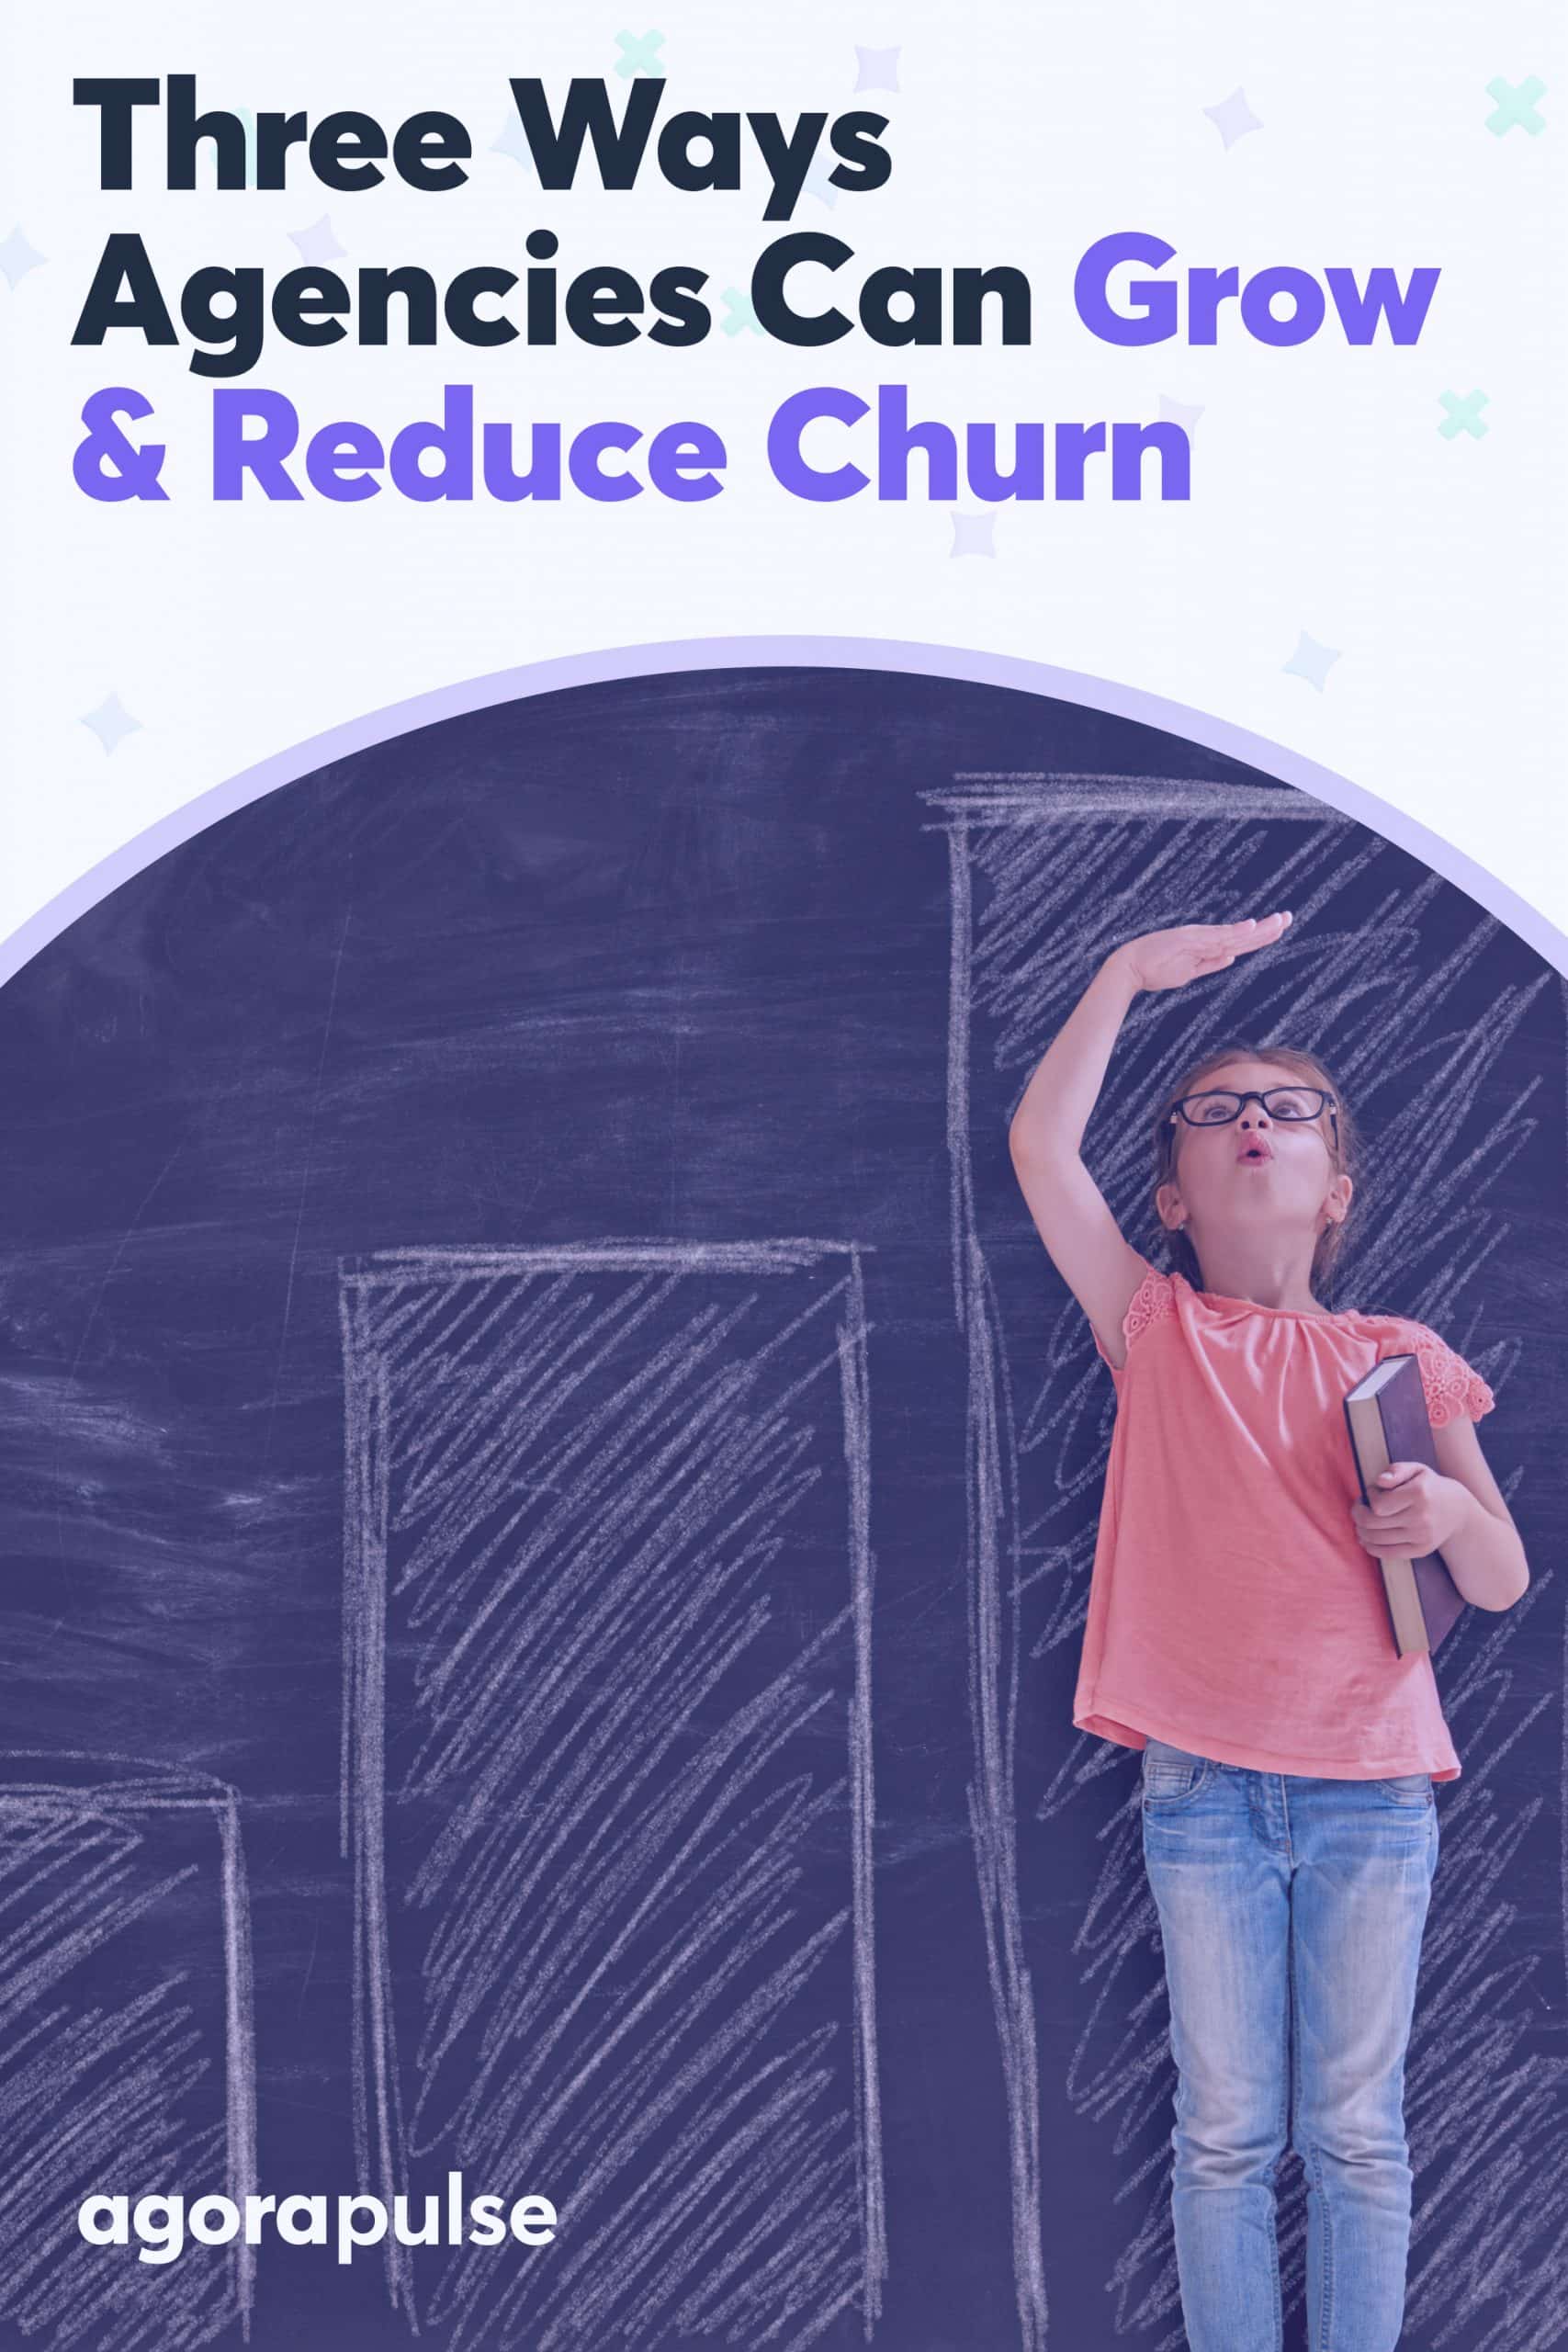 How to Reduce Churn and Grow Your Agency at the Same Time